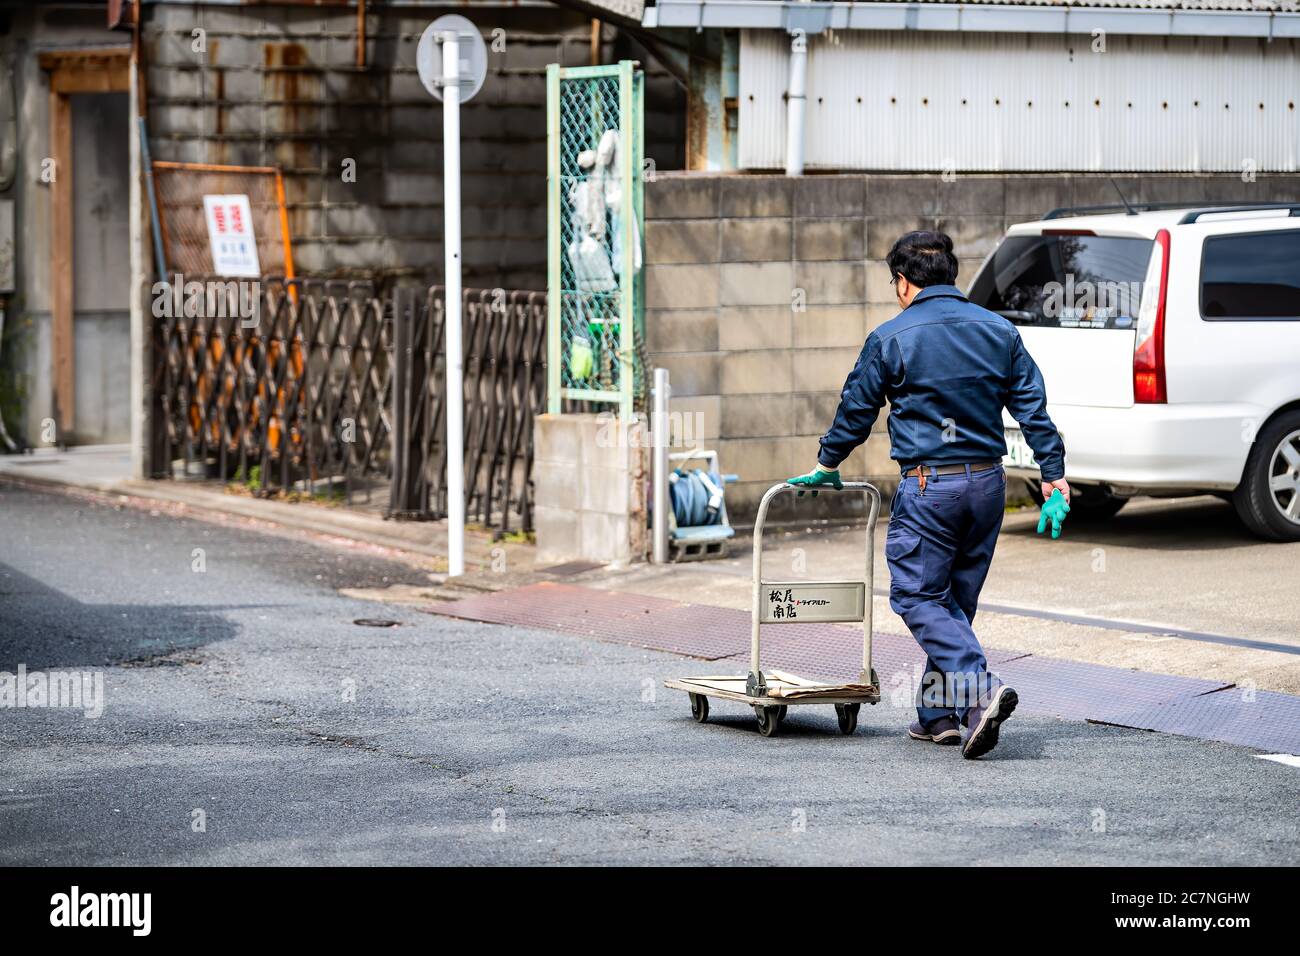 Kyoto, Japan - April 17, 2019: Japanese delivery man carrying pushing trolley walking on street candid city life of worker Stock Photo